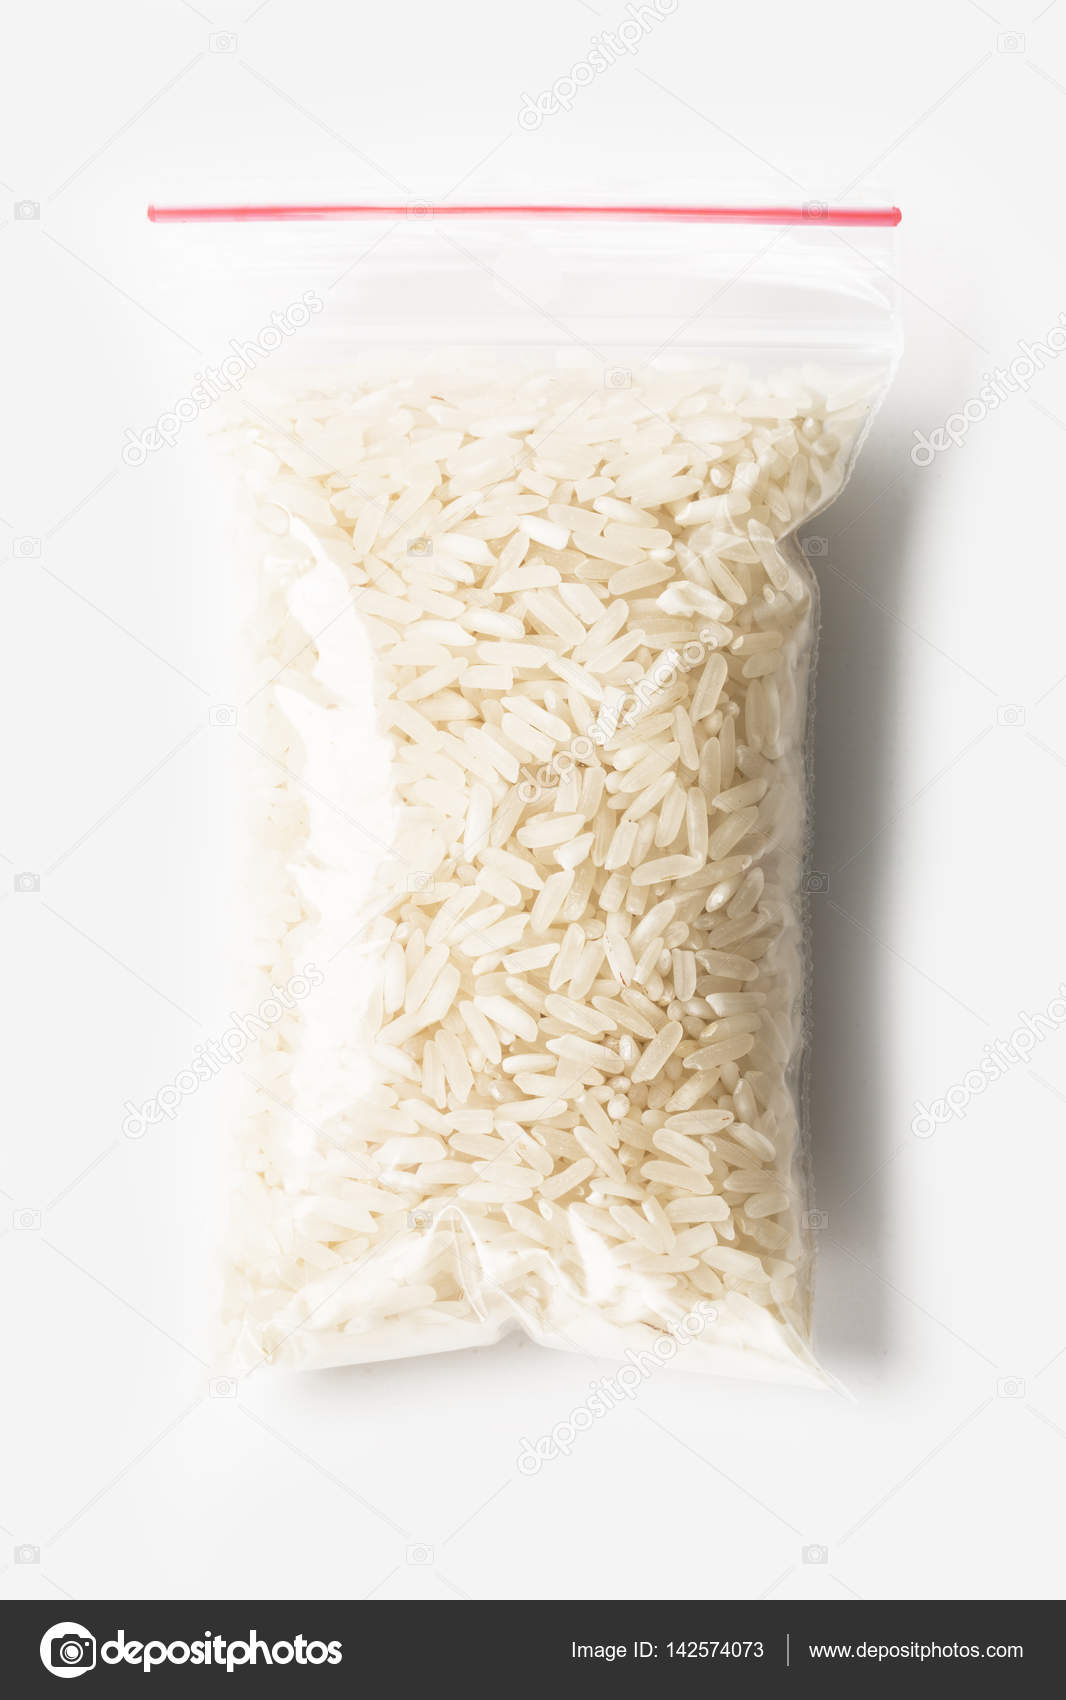 Download Plastic Transparent Zipper Bag With Full Uncooked White Basmati Rice Isolated On White Vacuum Package Mockup With Red Clip Concept Stock Photo Image By C Pavelvinnik 142574073